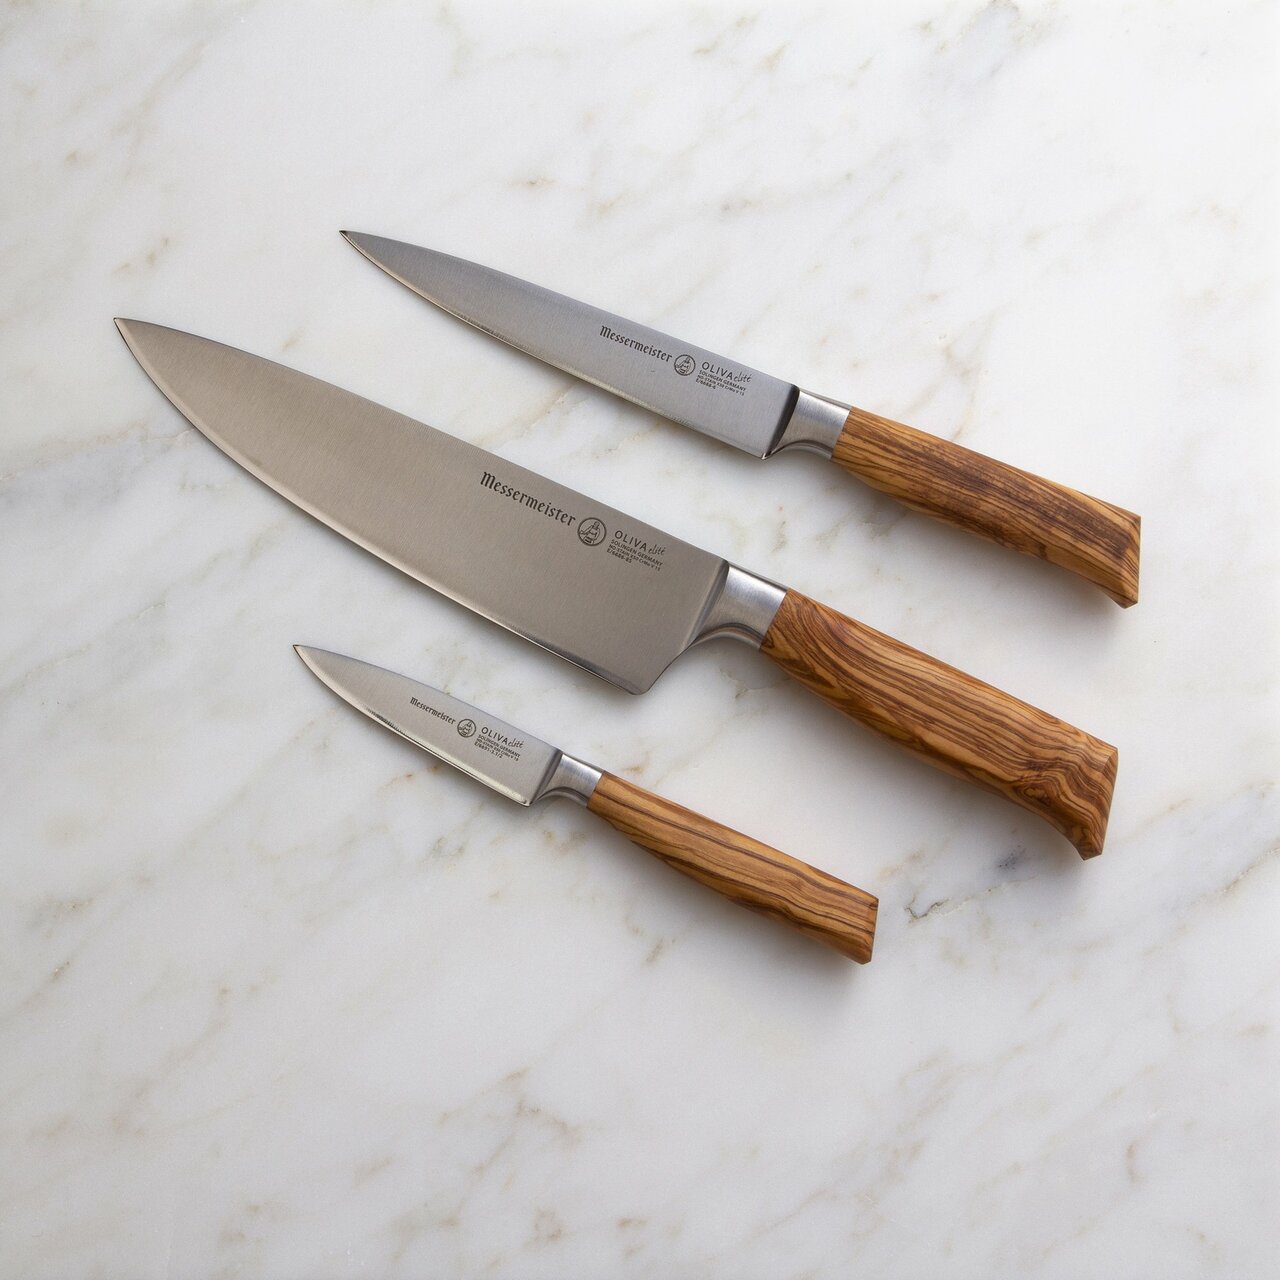 BEON.COM.AU Oliva Elité 3 Piece Starter Set The Messermeister Oliva Elité 3 Piece Starter Set consists of an 8 Inch Stealth Chef's Knife (E6686 8S), 6 Inch Utility Knife (E6688 6), and 3.5 Inch Spear Point Paring Knife (E6691-3). These three are the most utilized knives in the kitchen!  Features The Germ... Messermeister at BEON.COM.AU